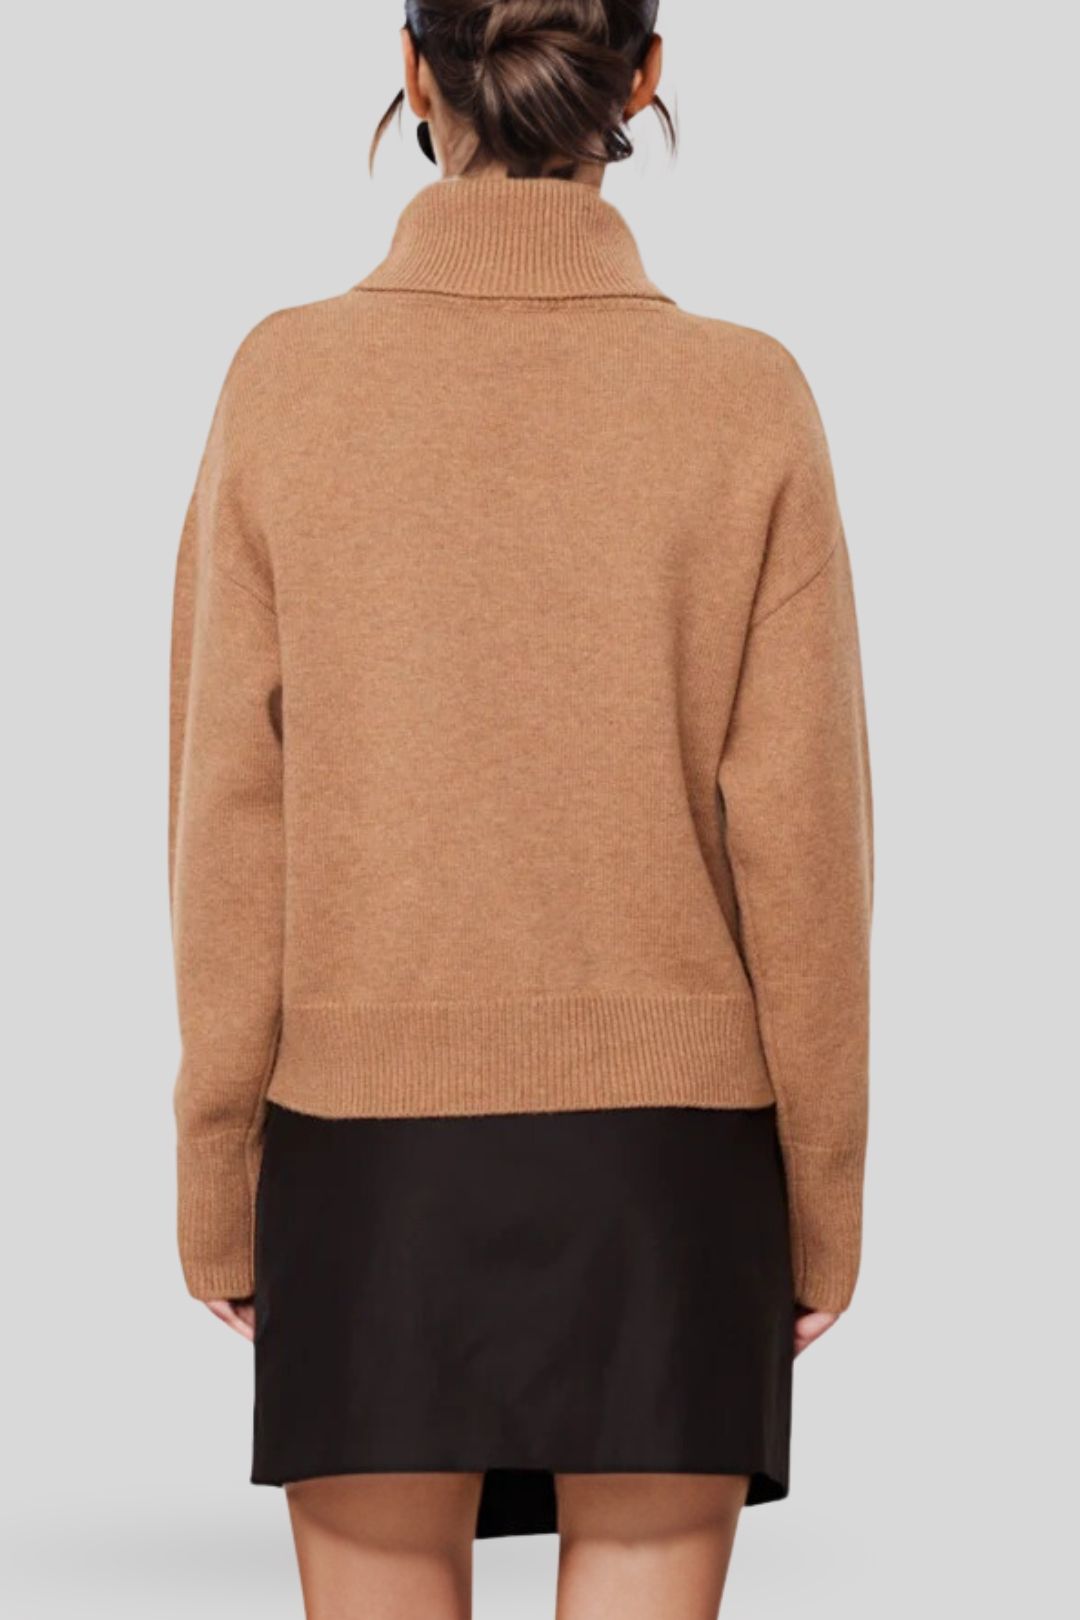 Mia Cashmere Roll Neck Knit Camel Relaxed Fit